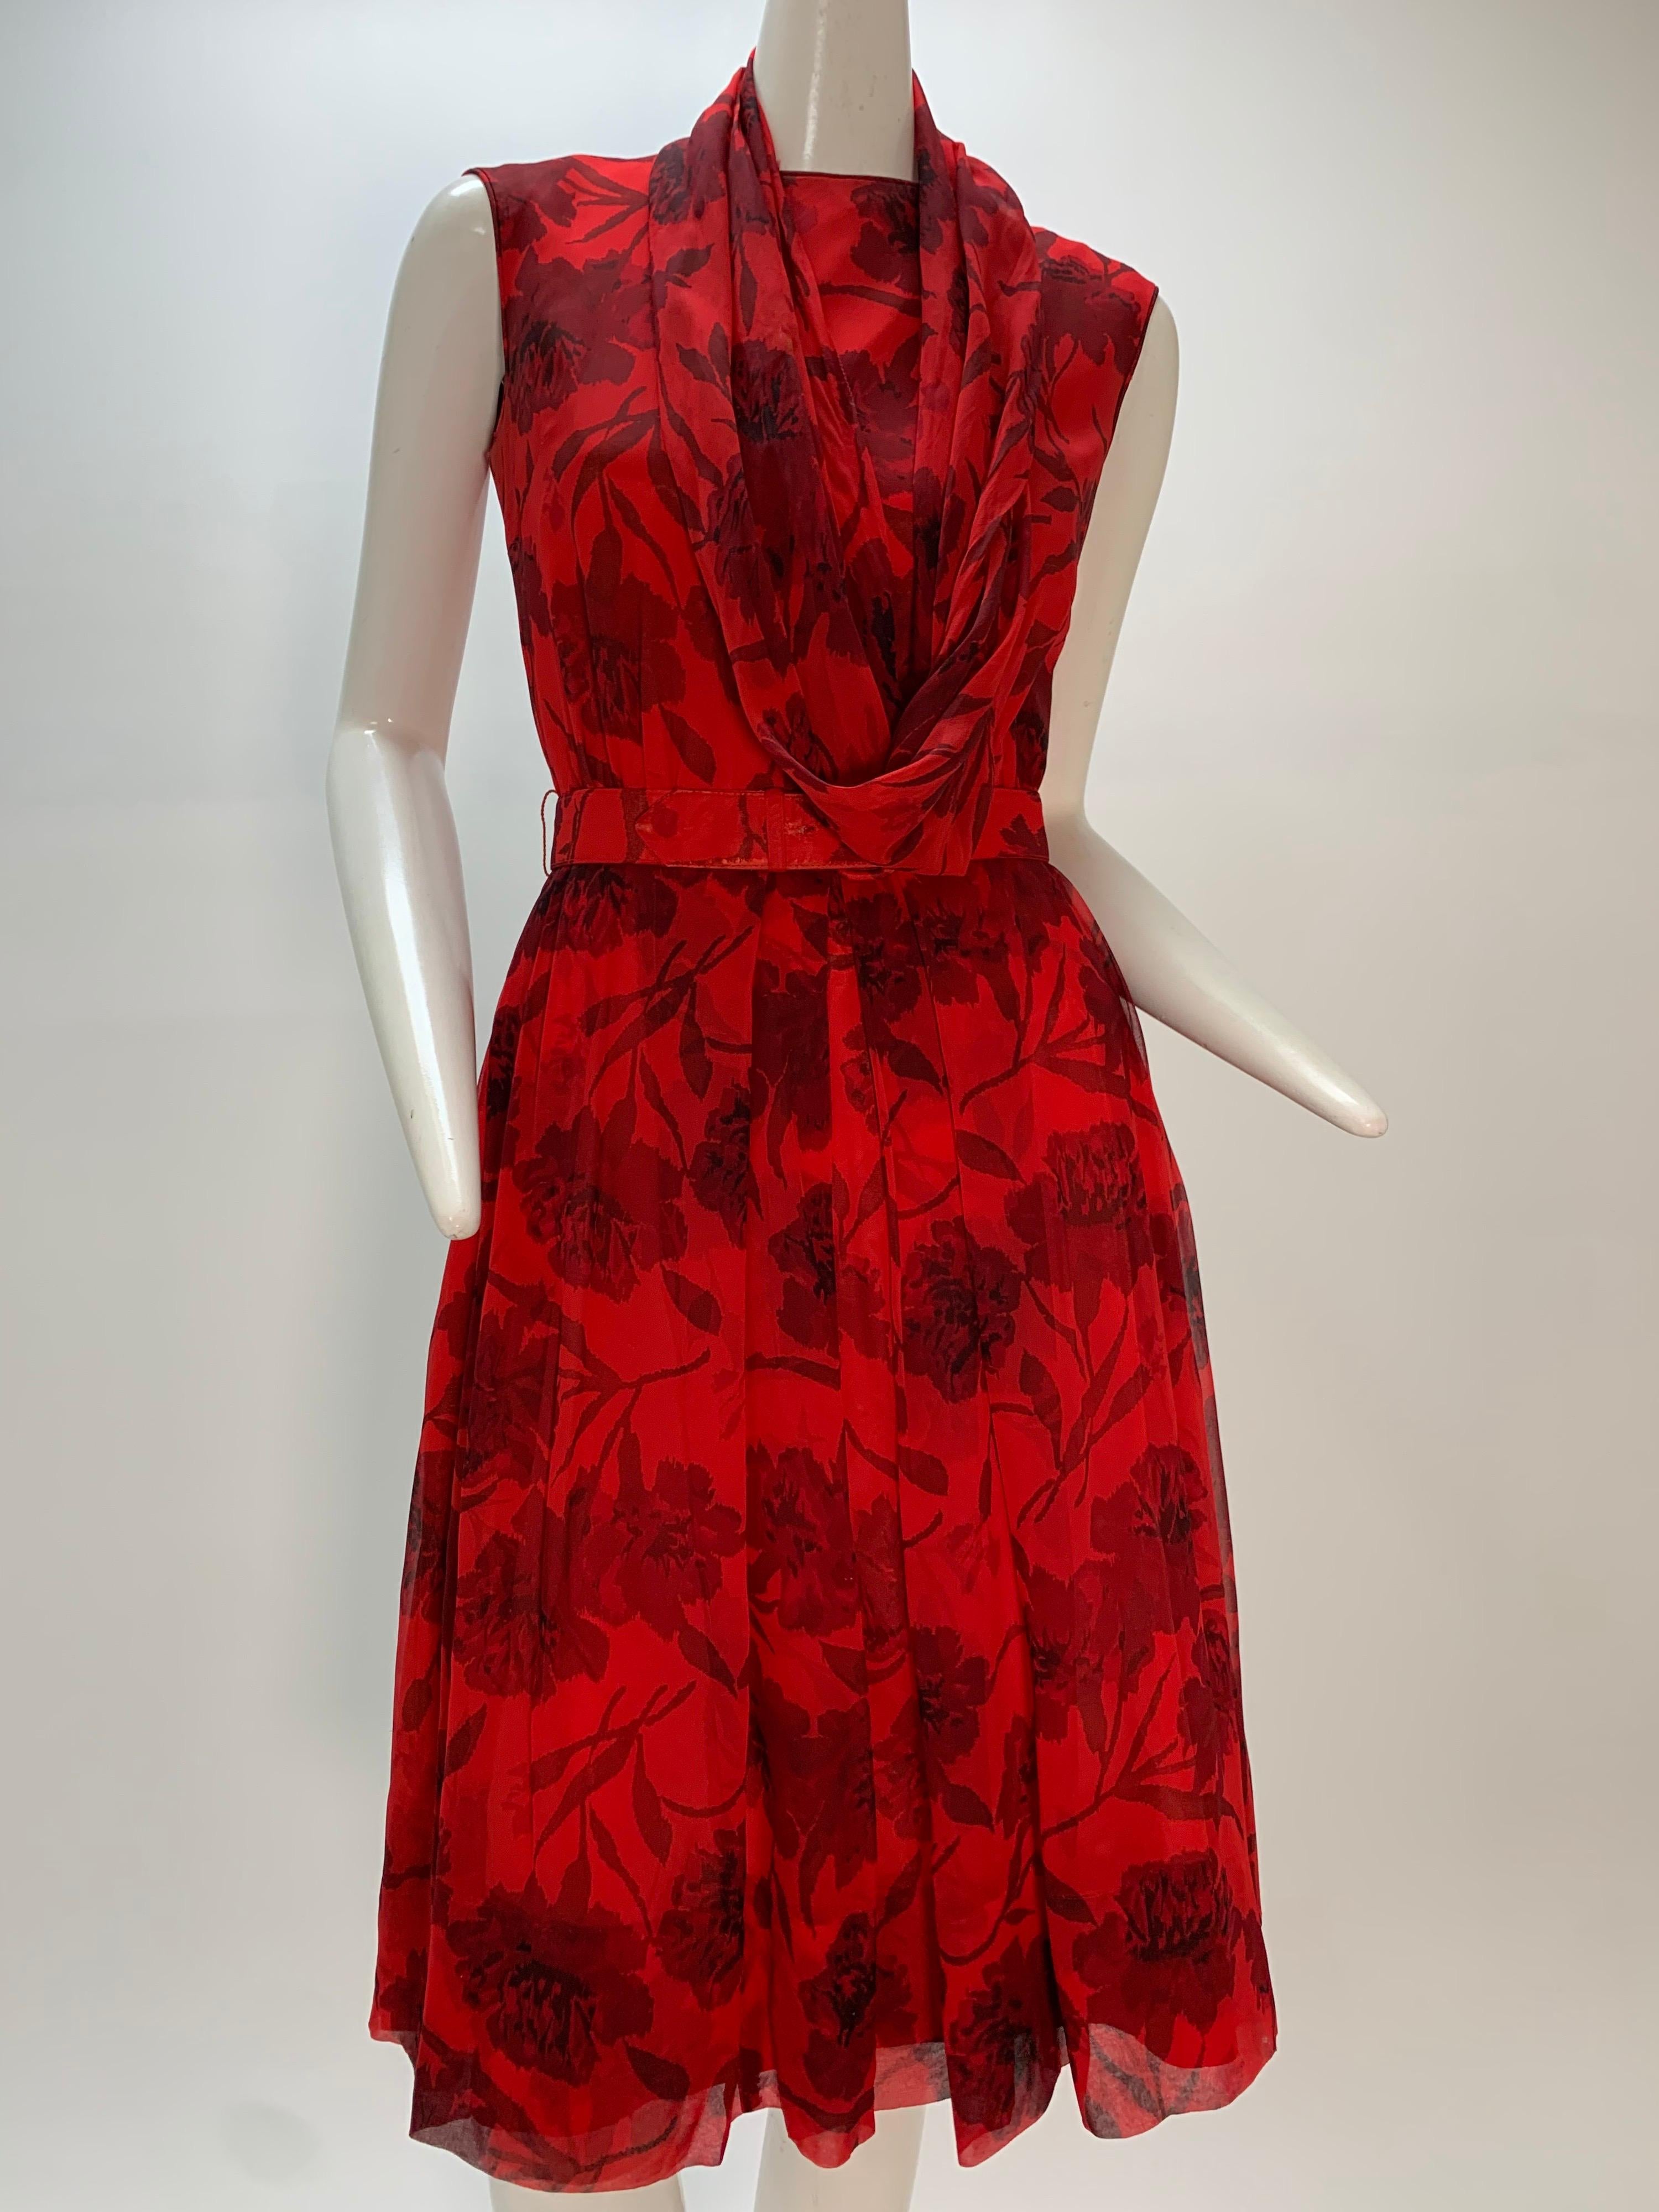 1960s Nelly Don Red Carnation Print Chiffon Sleeveless Cocktail Dress 3